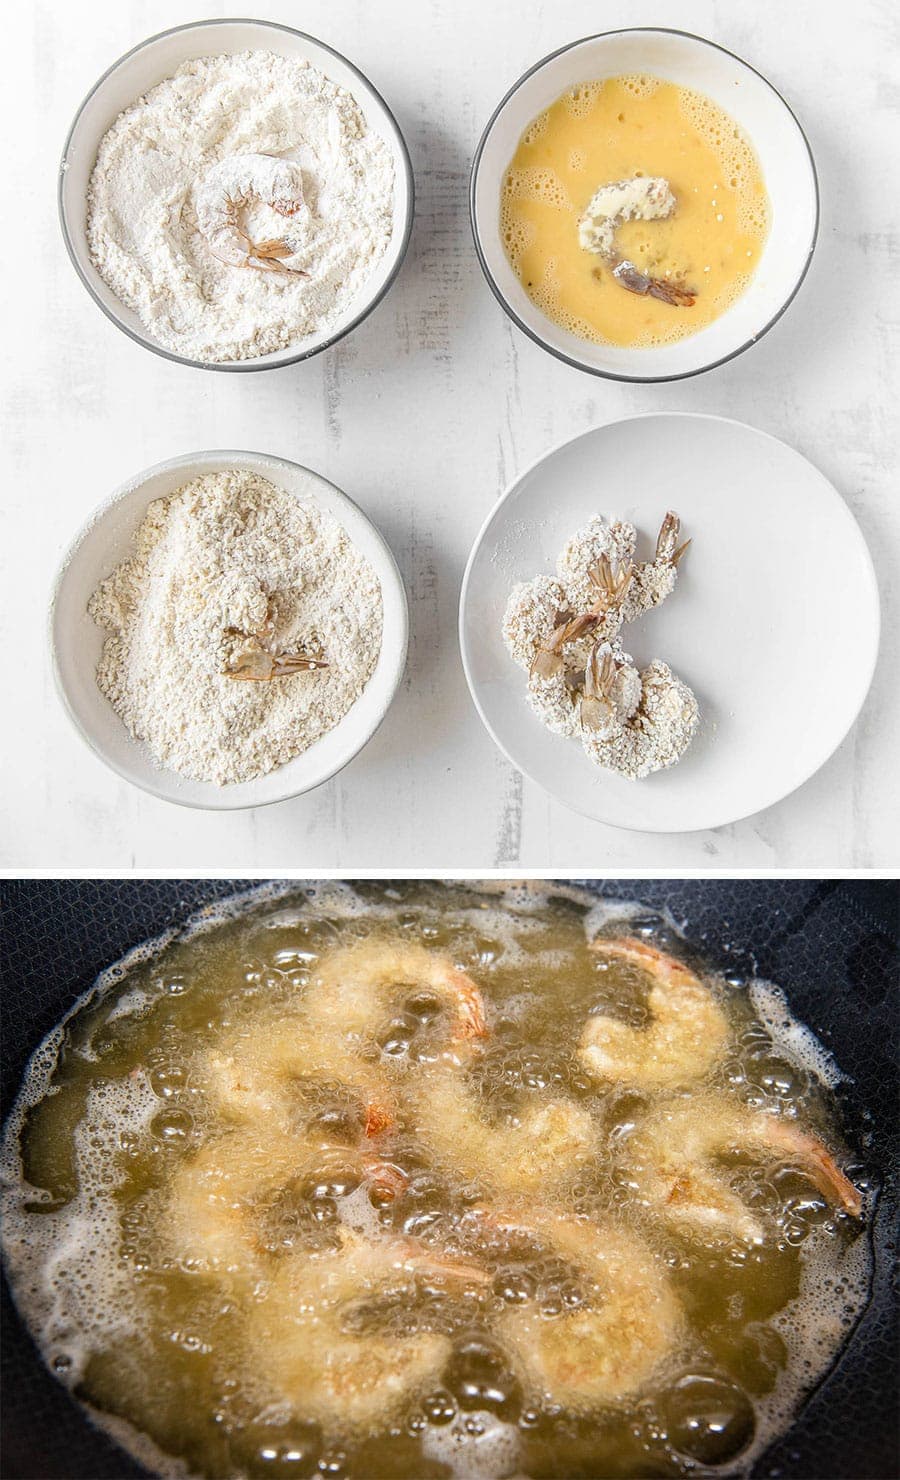 A collage of two images showing the breading and frying process for fried shrimp